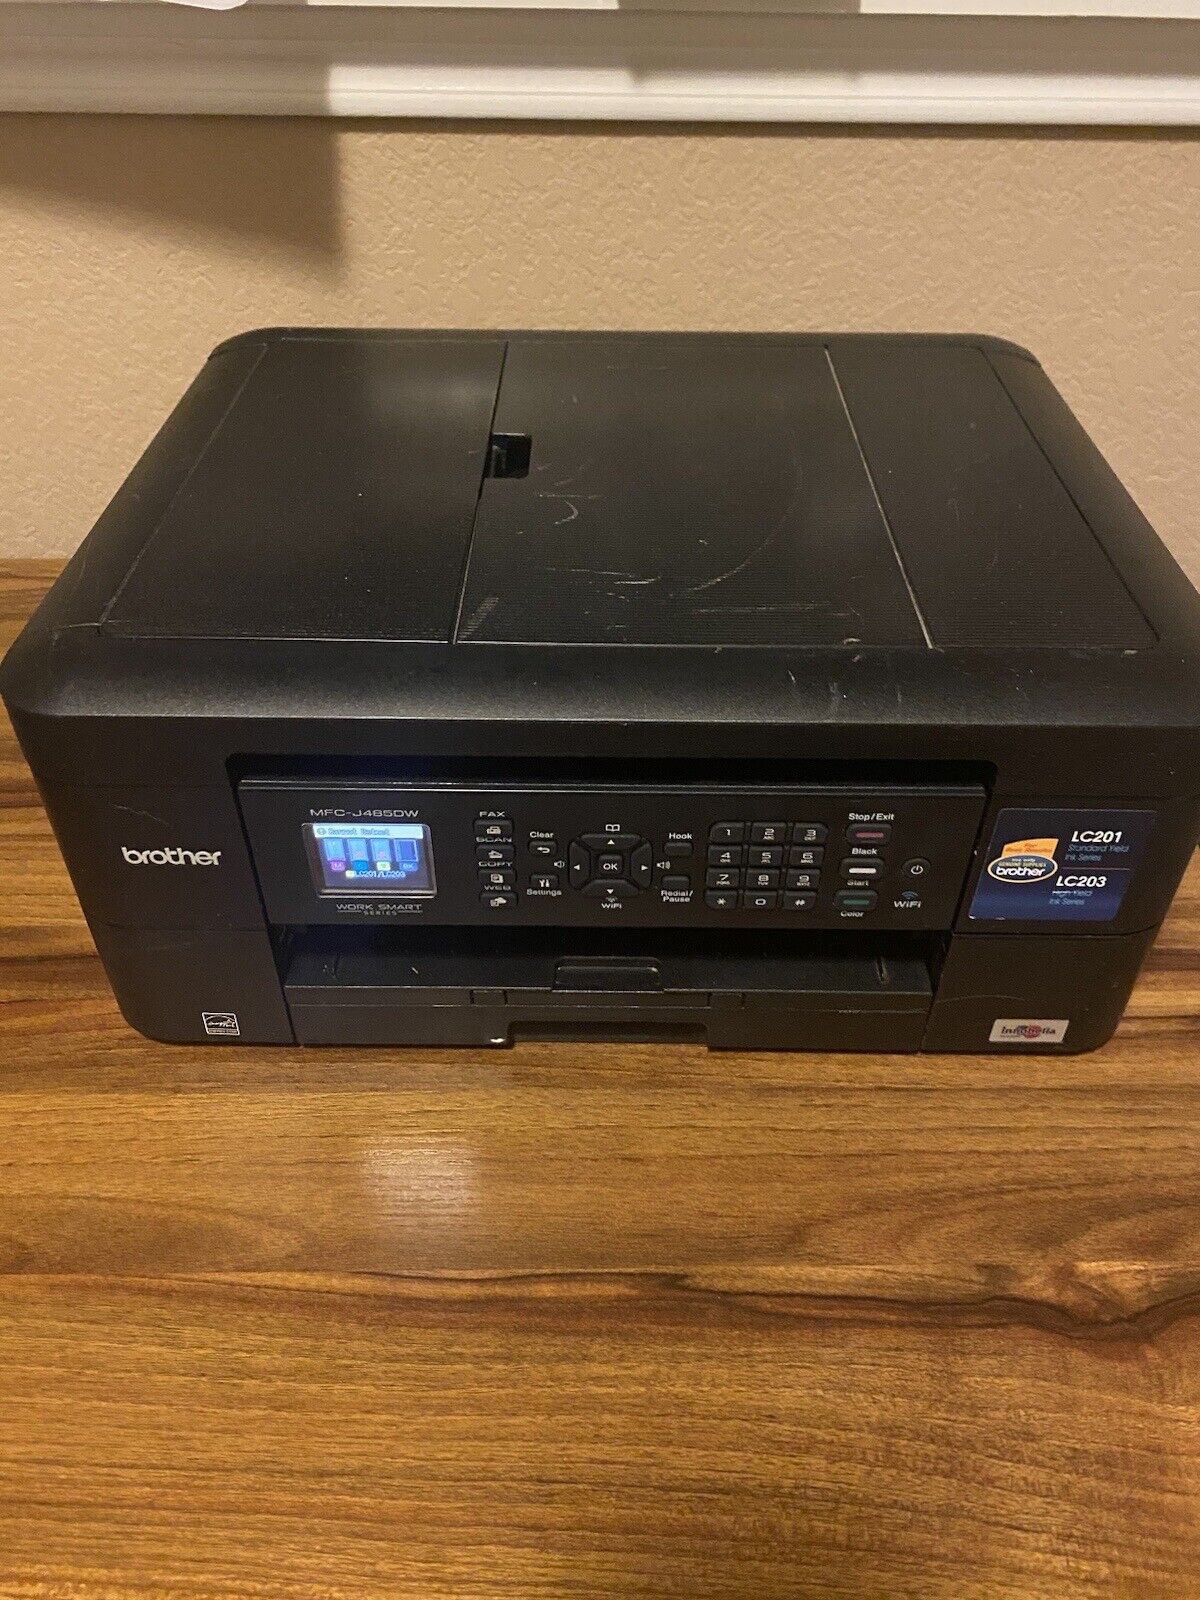 Brother MFC-J480DW Inkjet All-in-One Printer $50